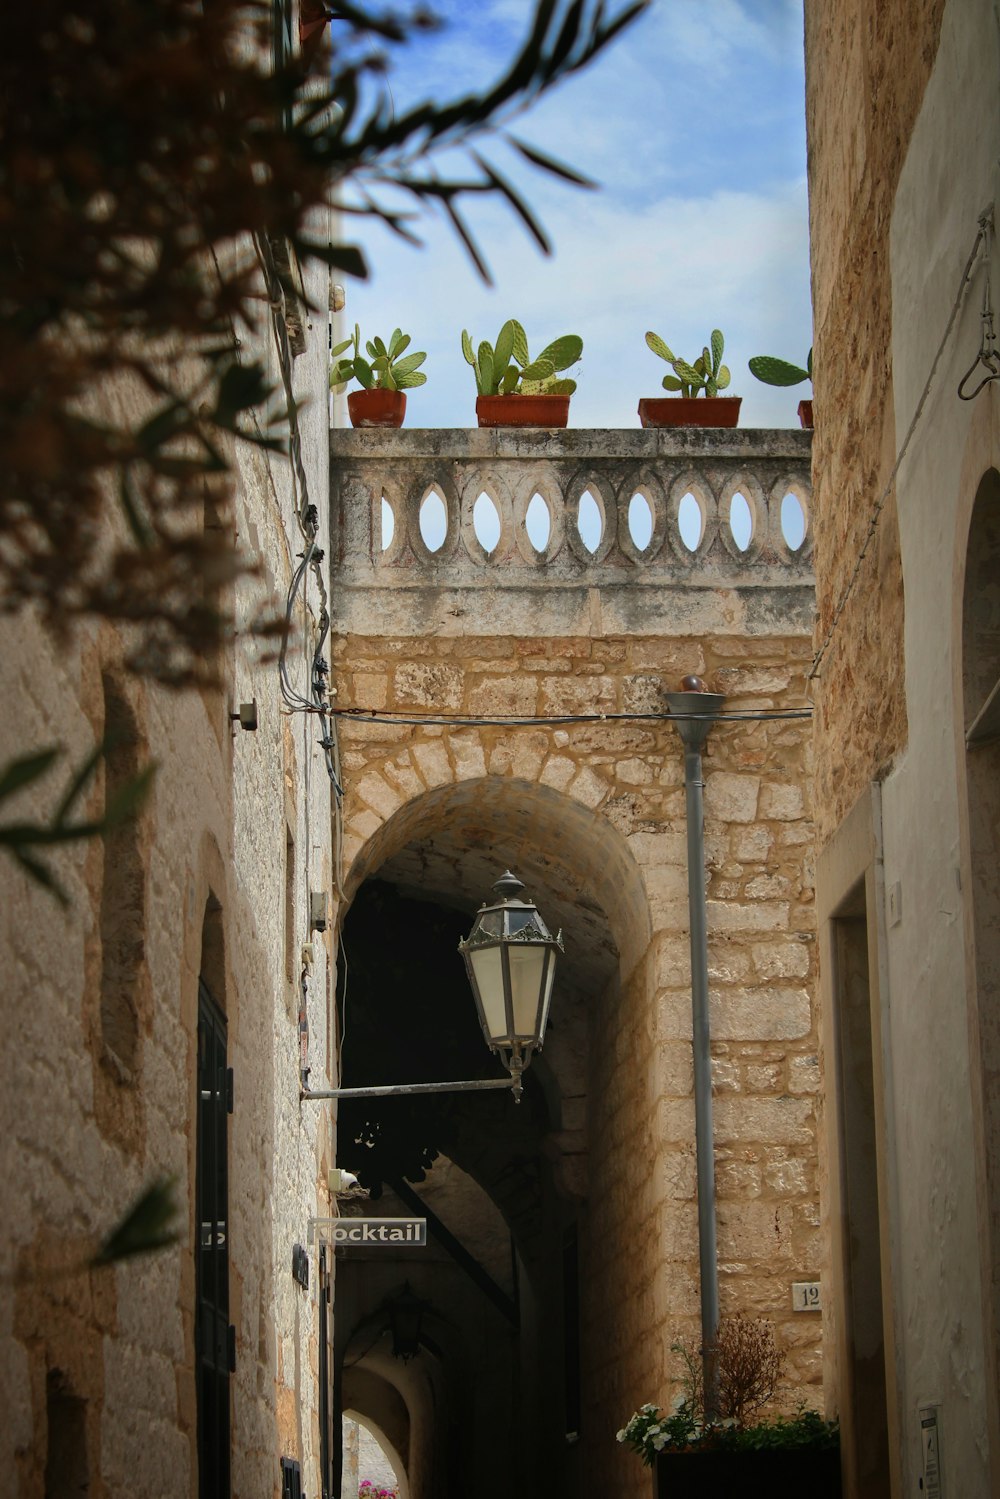 a narrow alley with a lamp post and potted plants